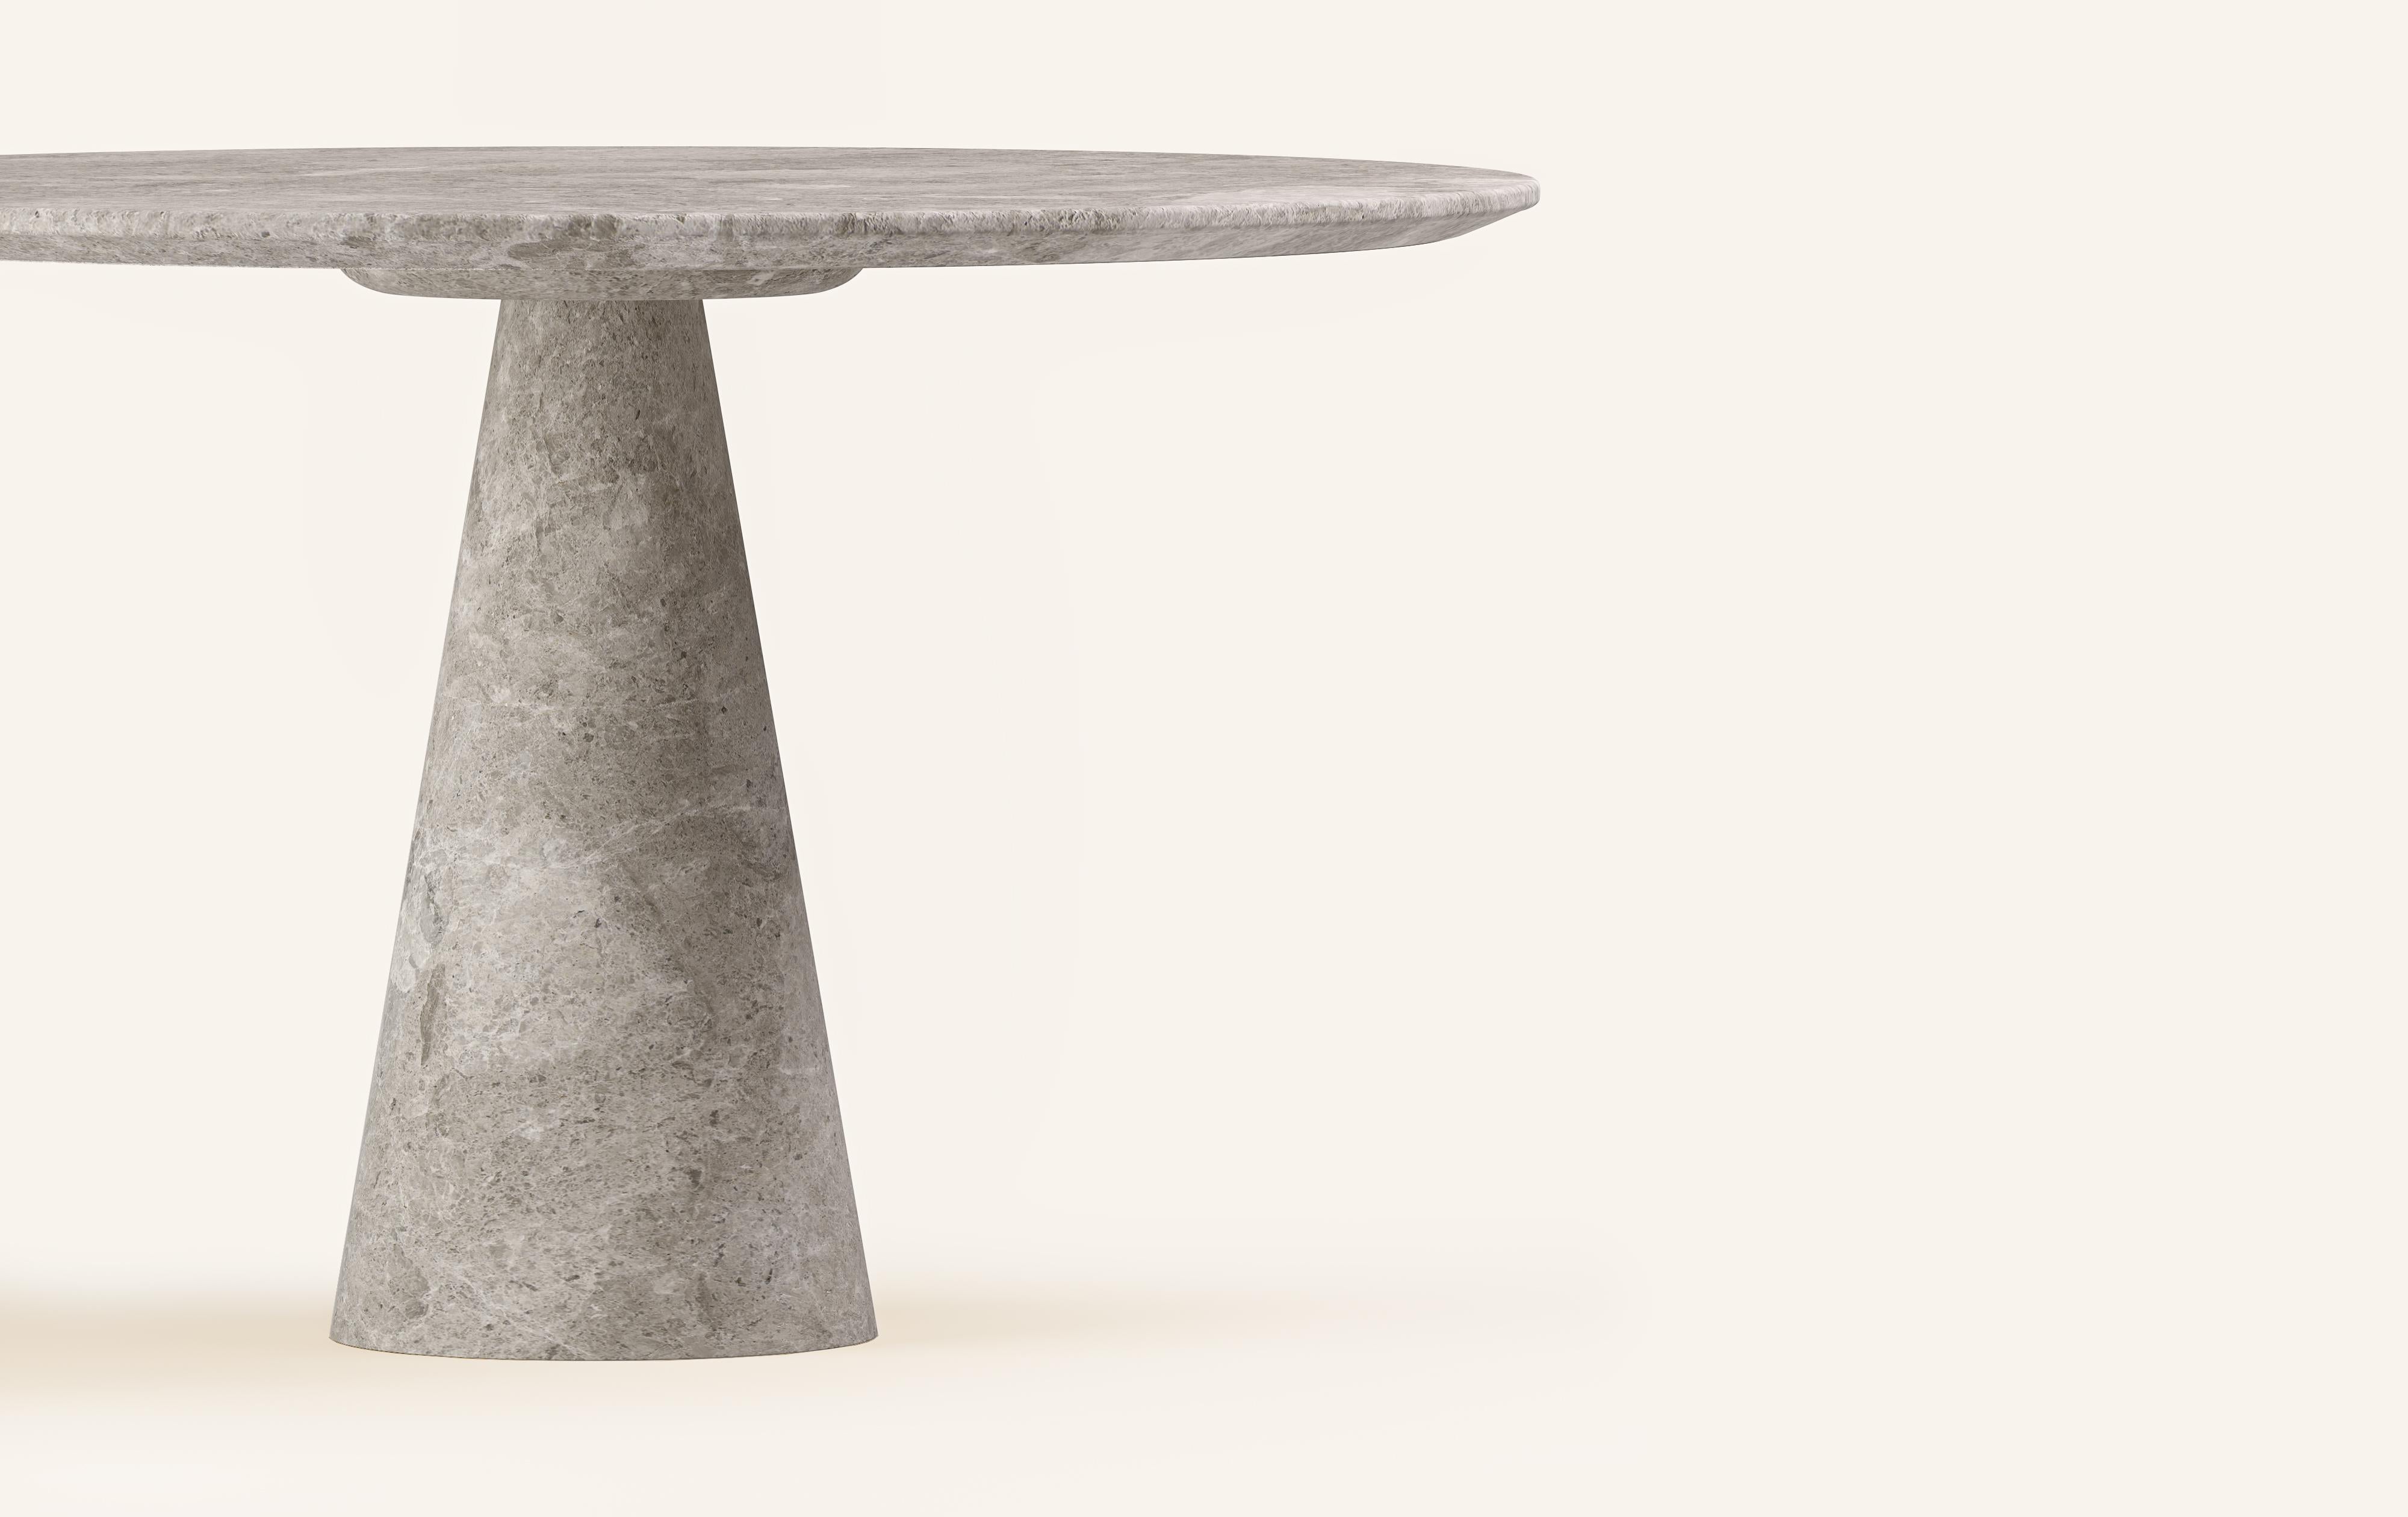 Organic Modern FORM(LA) Cono Round Dining Table 36”L x 36”W x 30”H Tundra Gray Marble For Sale